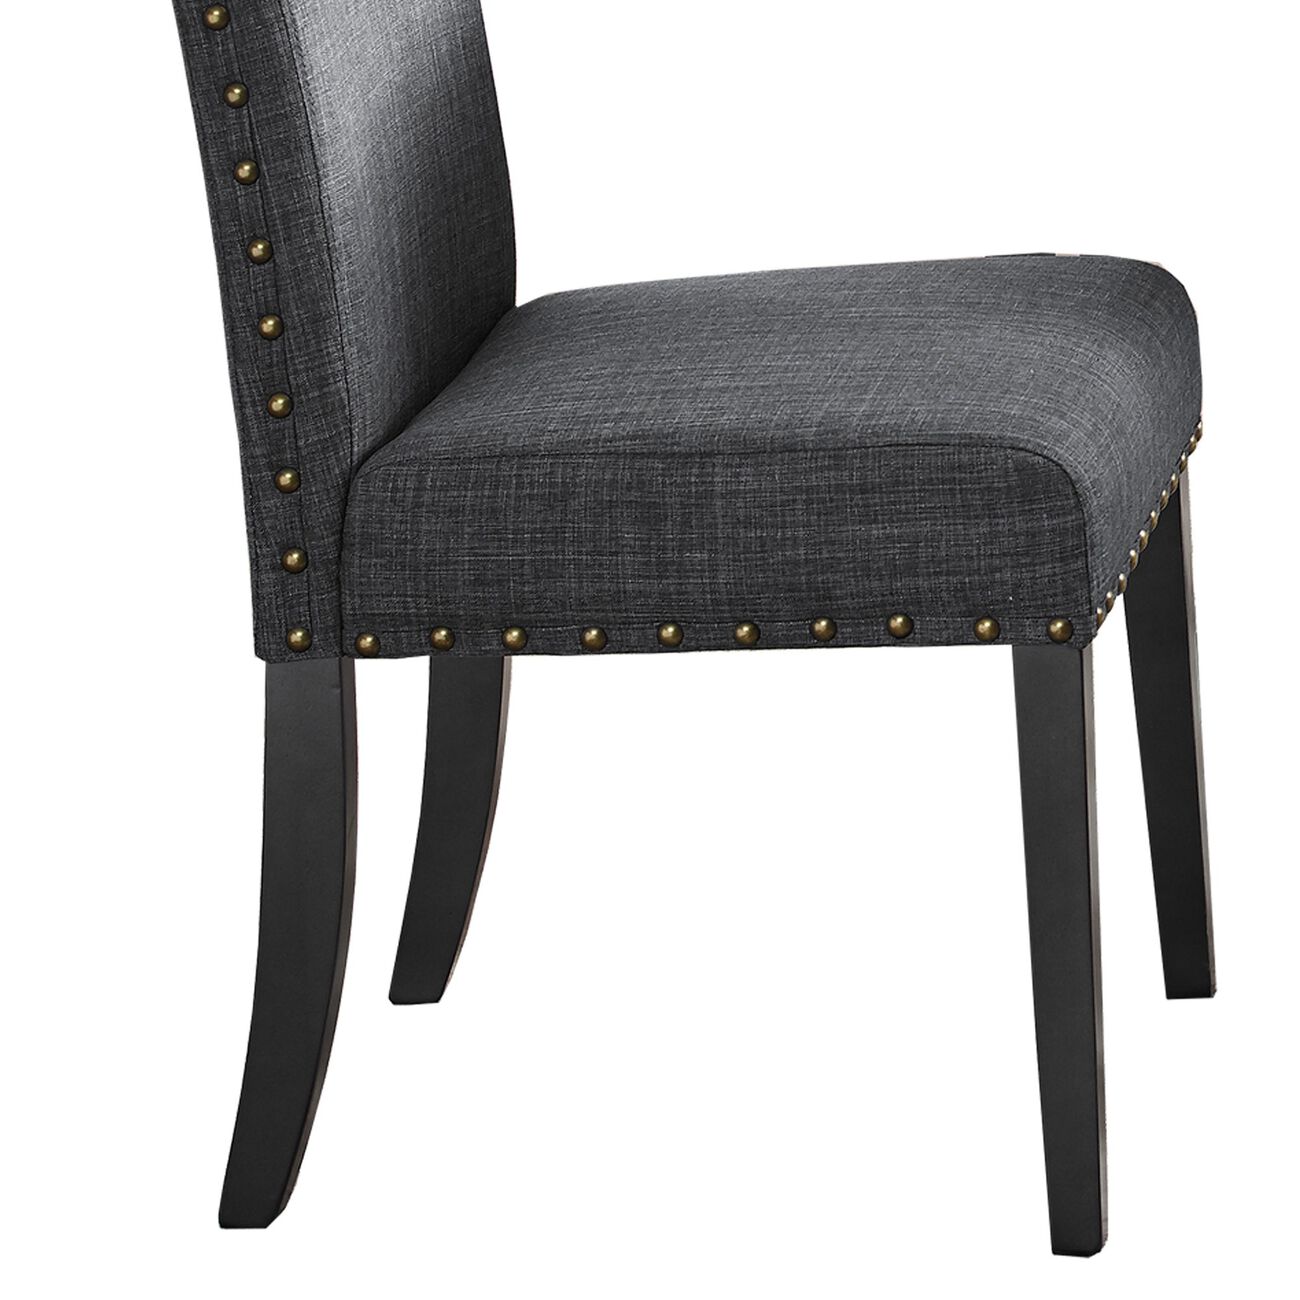 Flared Back Dining Chair with Padded Seat and Nailhead Trim,Set of 2, Gray